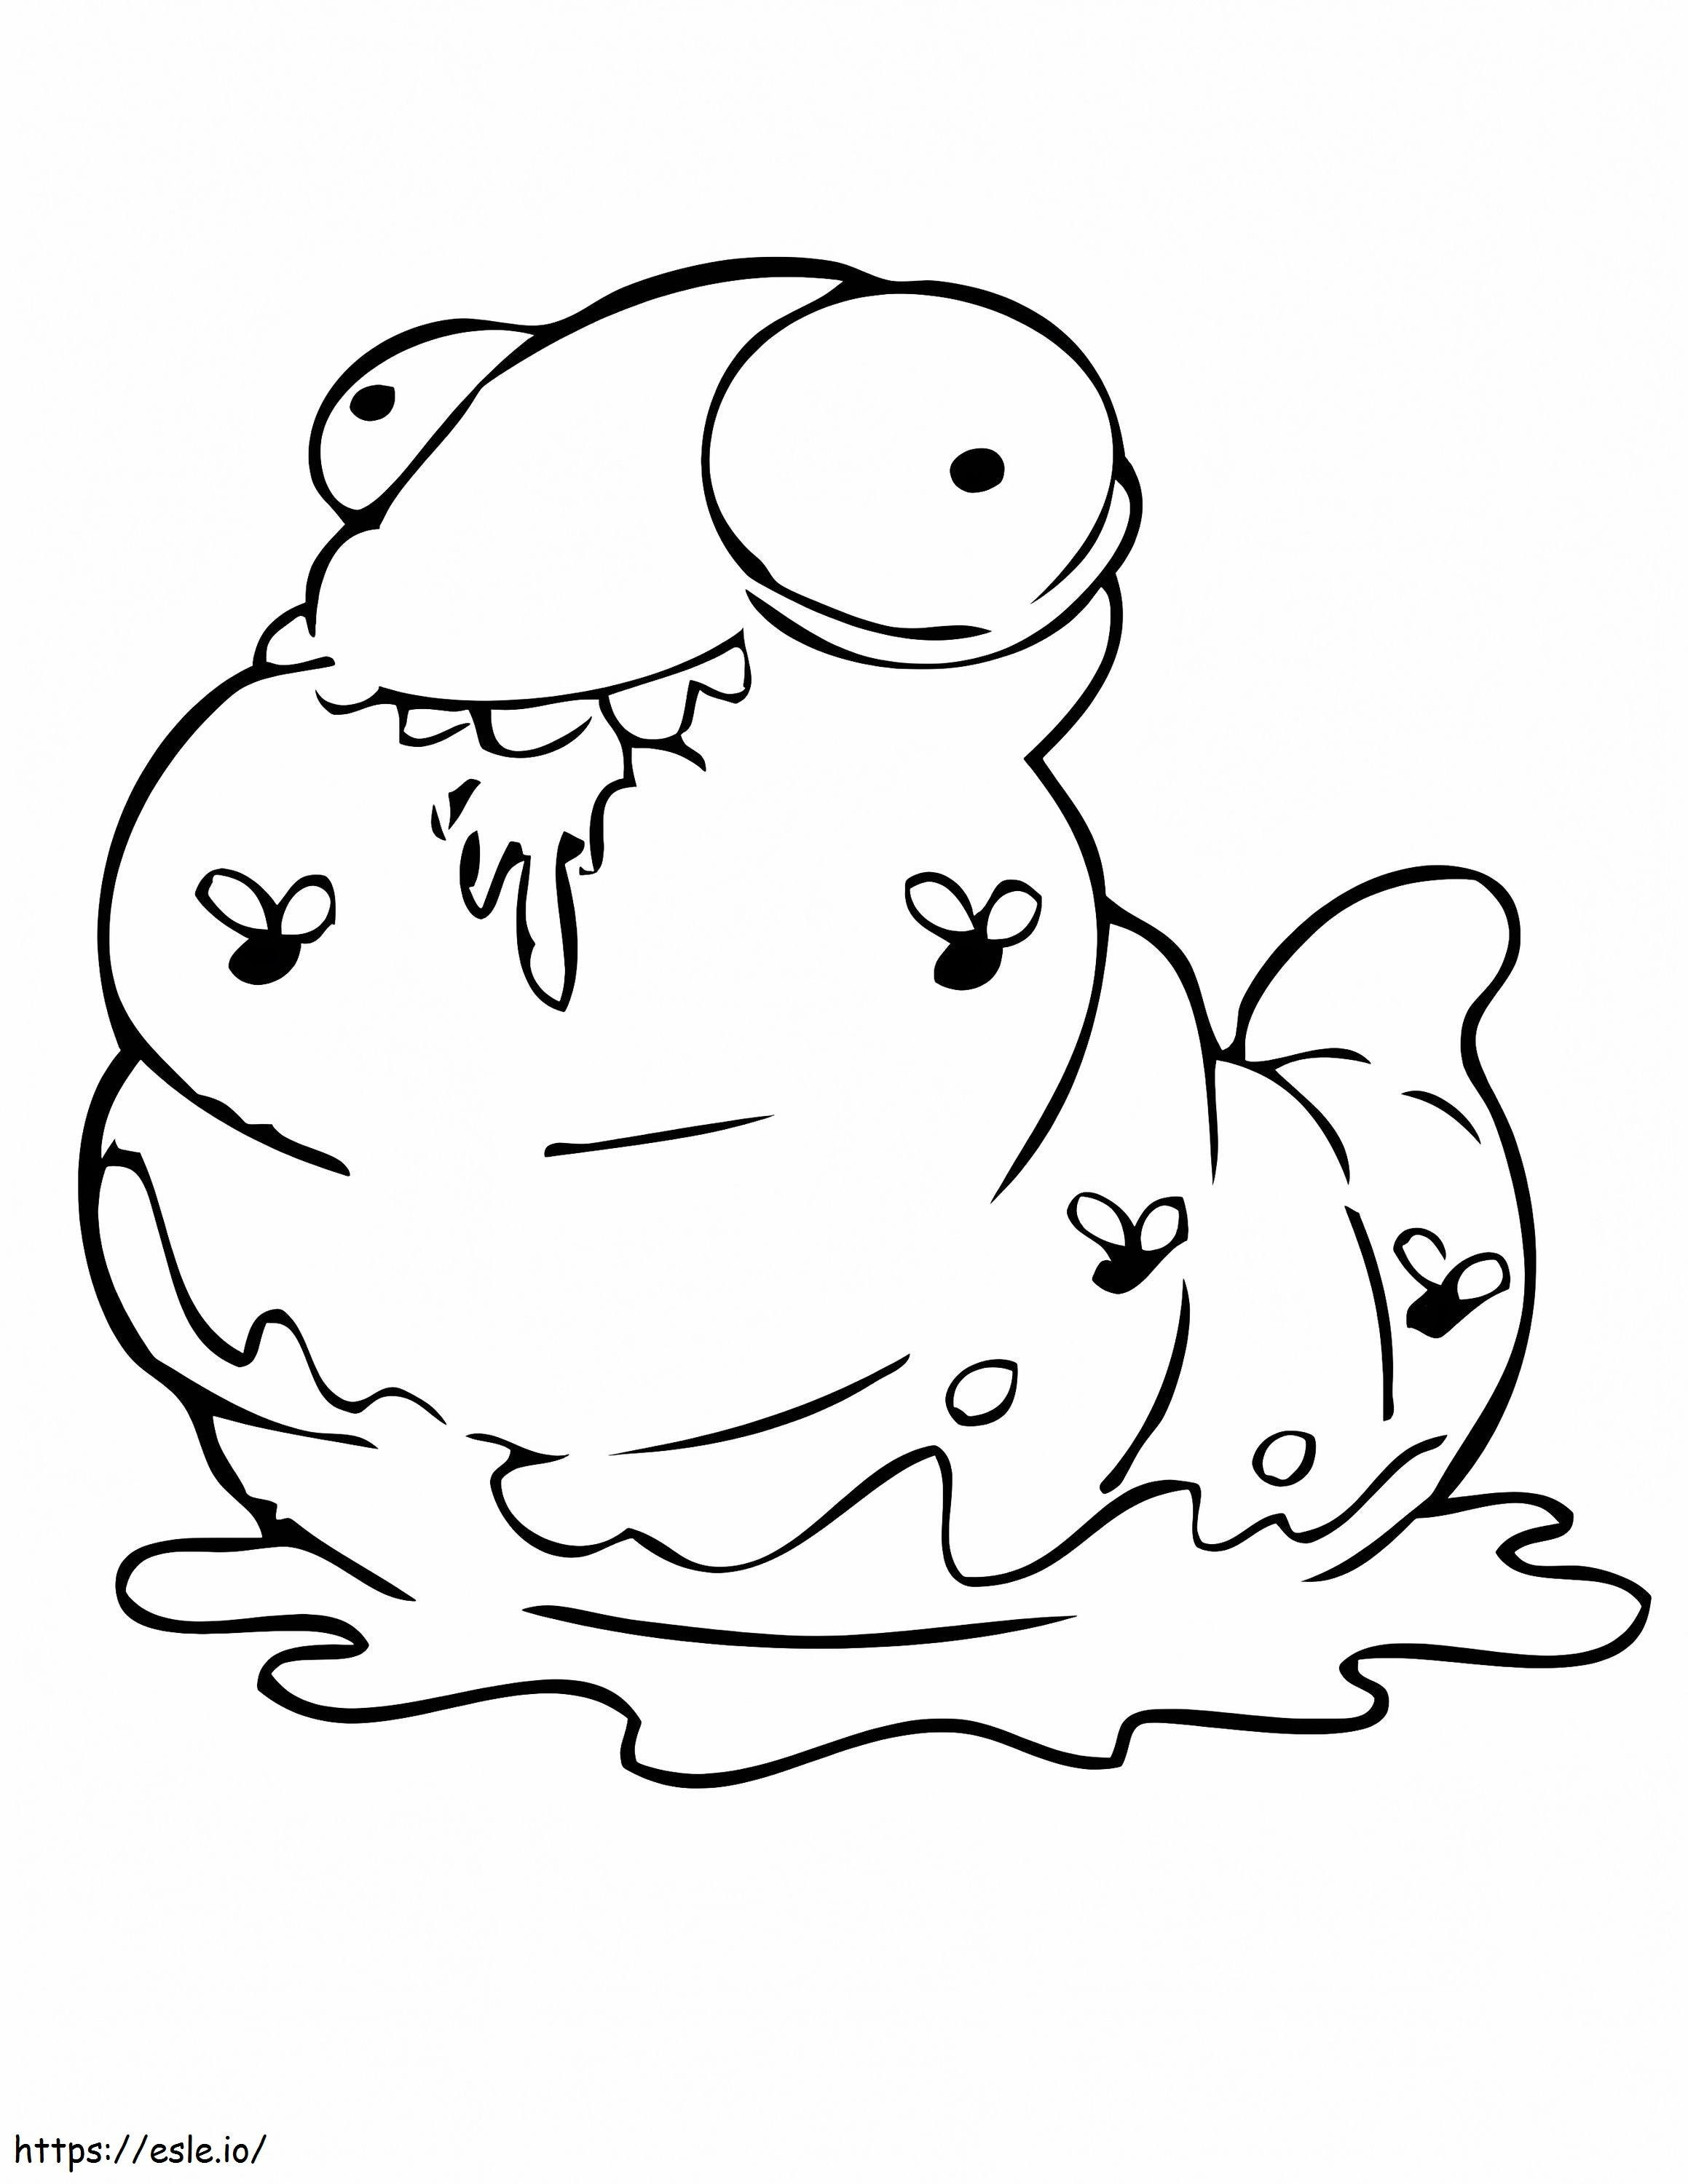 Mucky Maggot Trash Pack coloring page